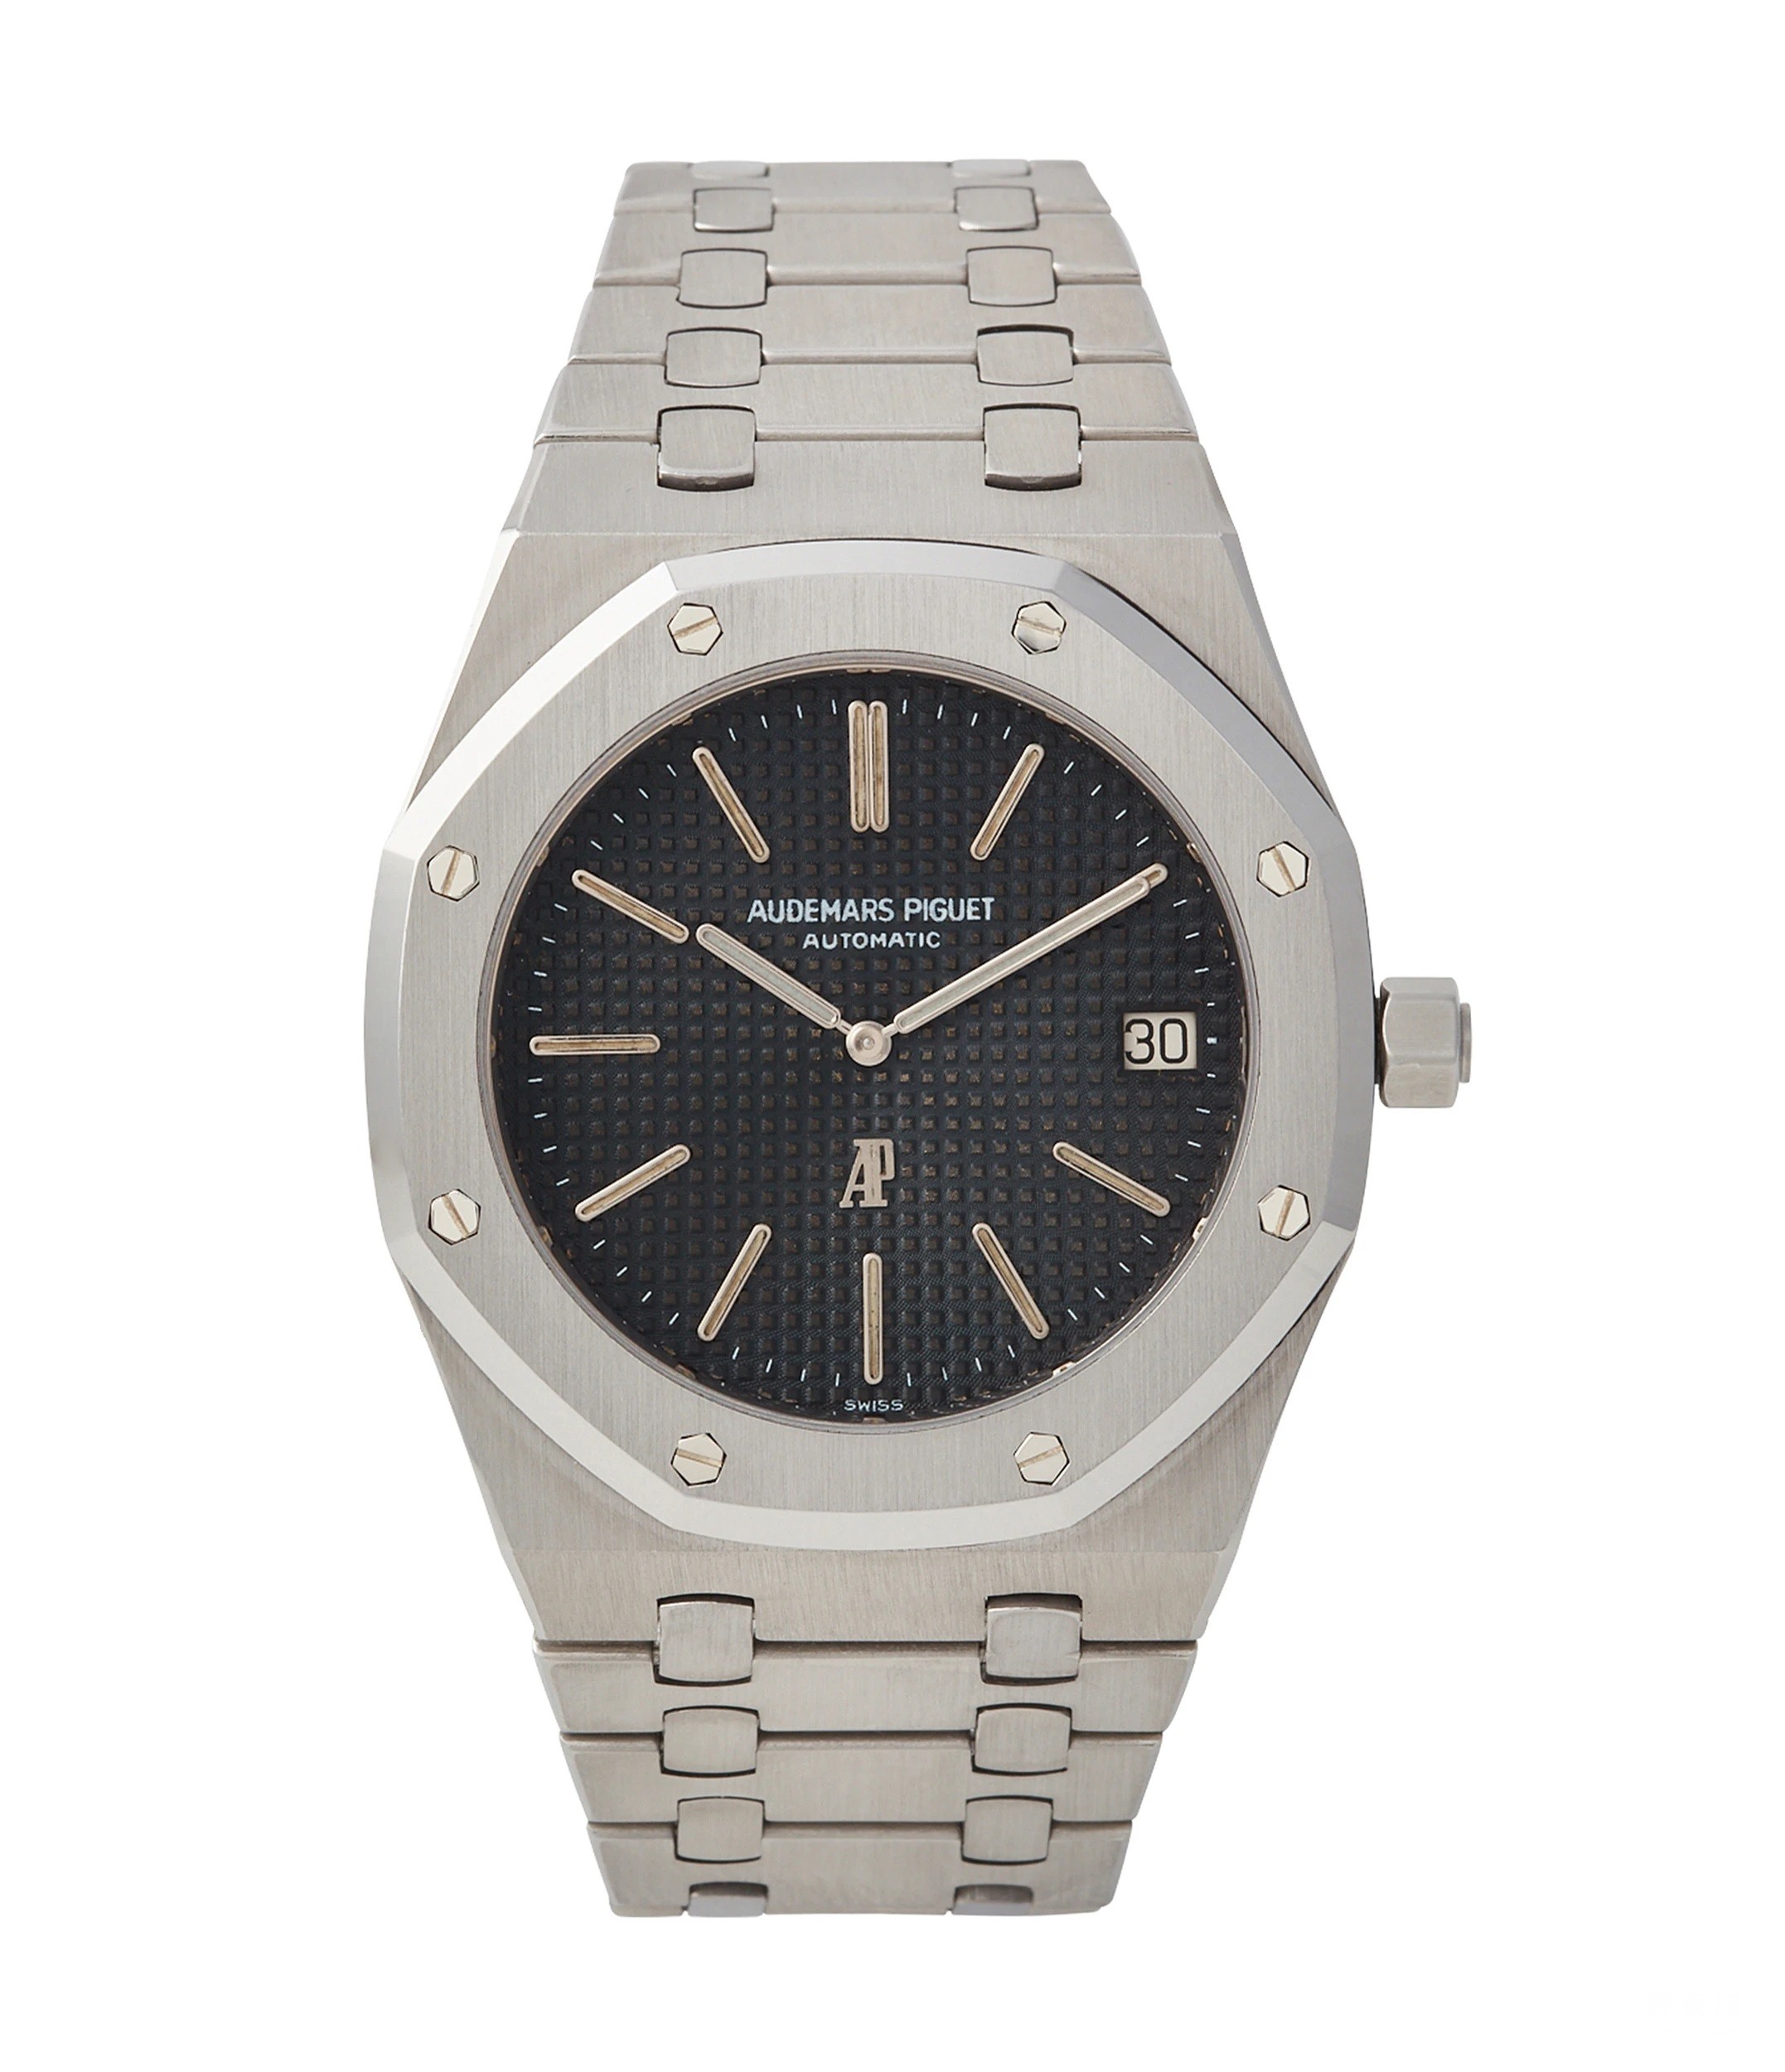 Royal Oak is always the symbolic collection of fake Audemars Piguet.